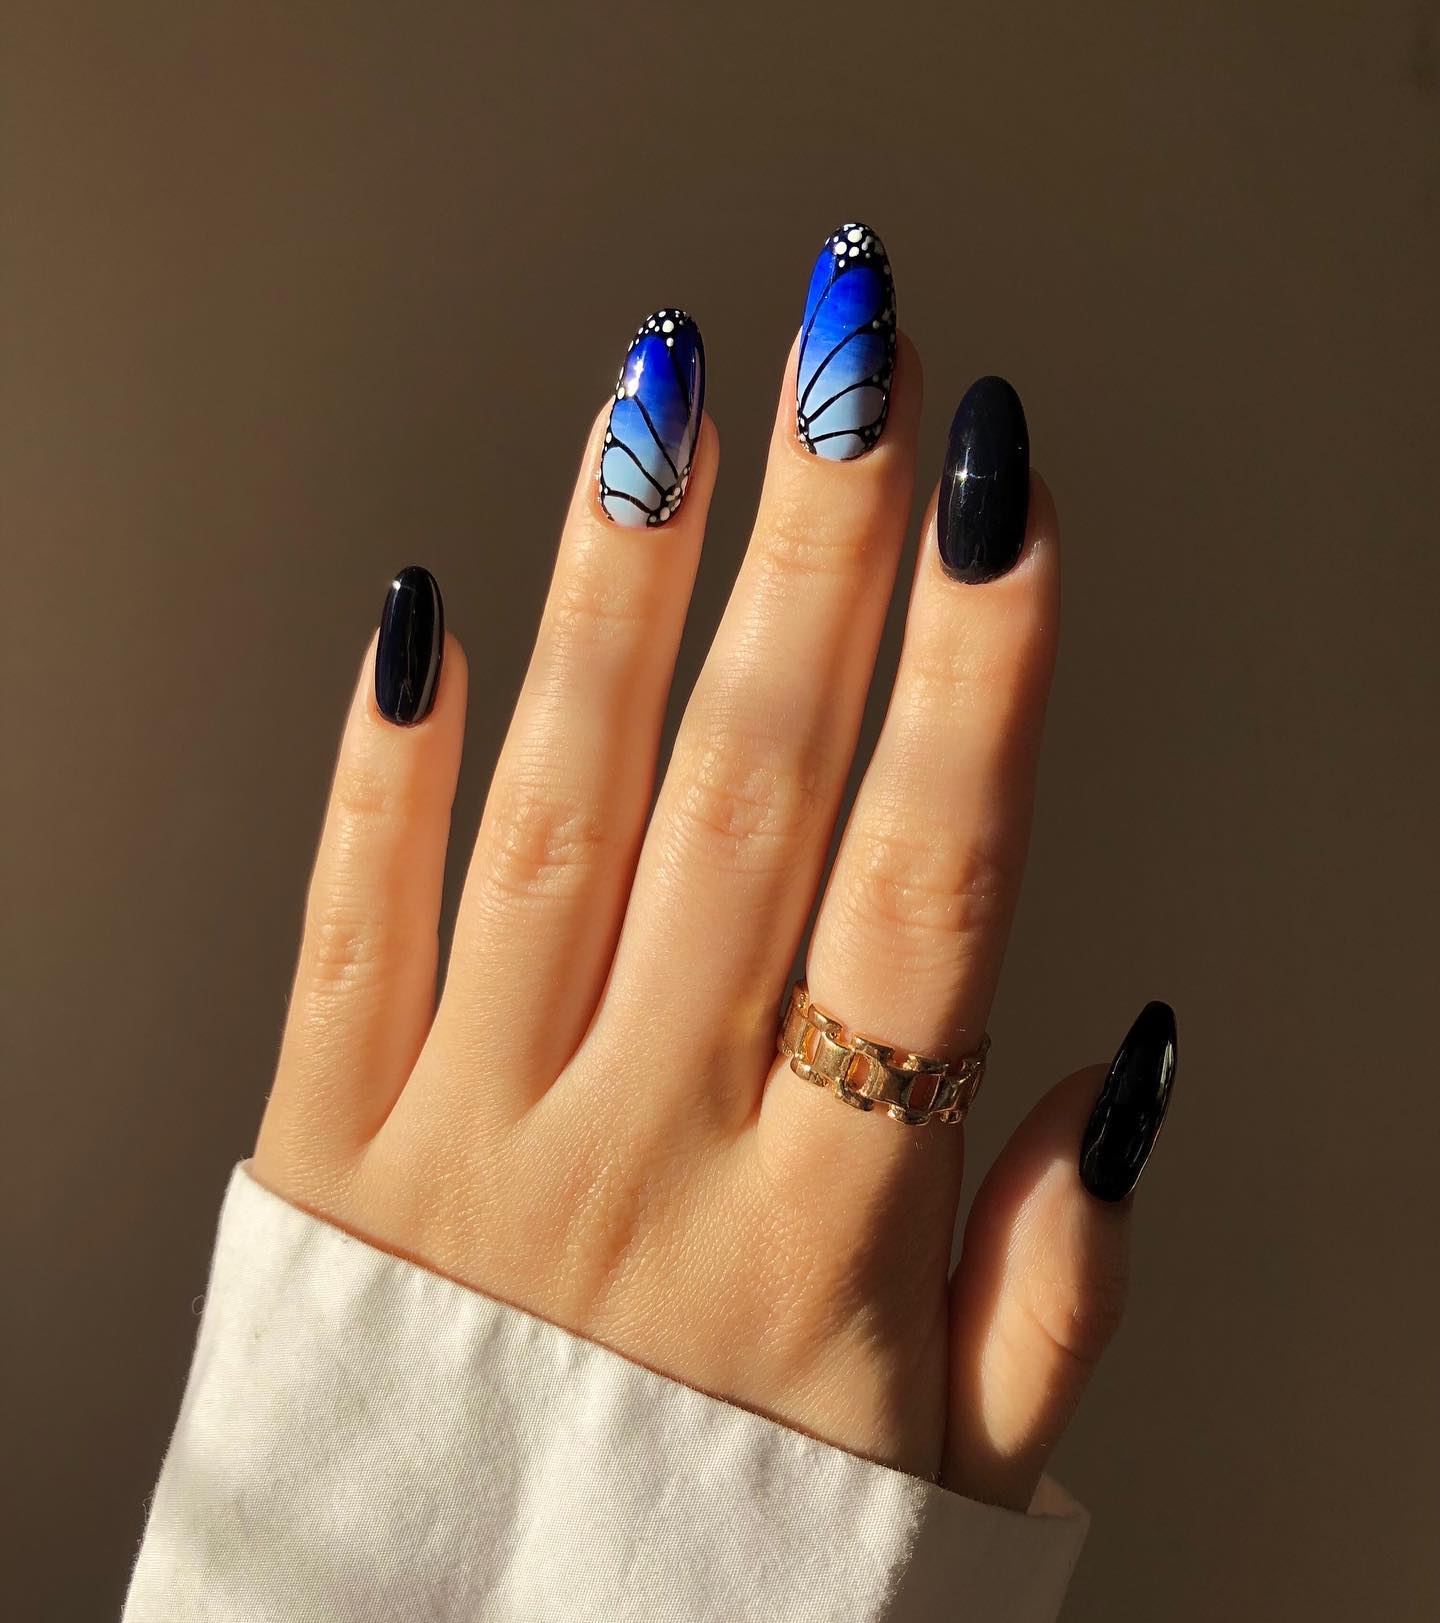 Black has always been a favorite color for nails. Have you ever tried to mix it with some blue butterflies? If not, hurry up.